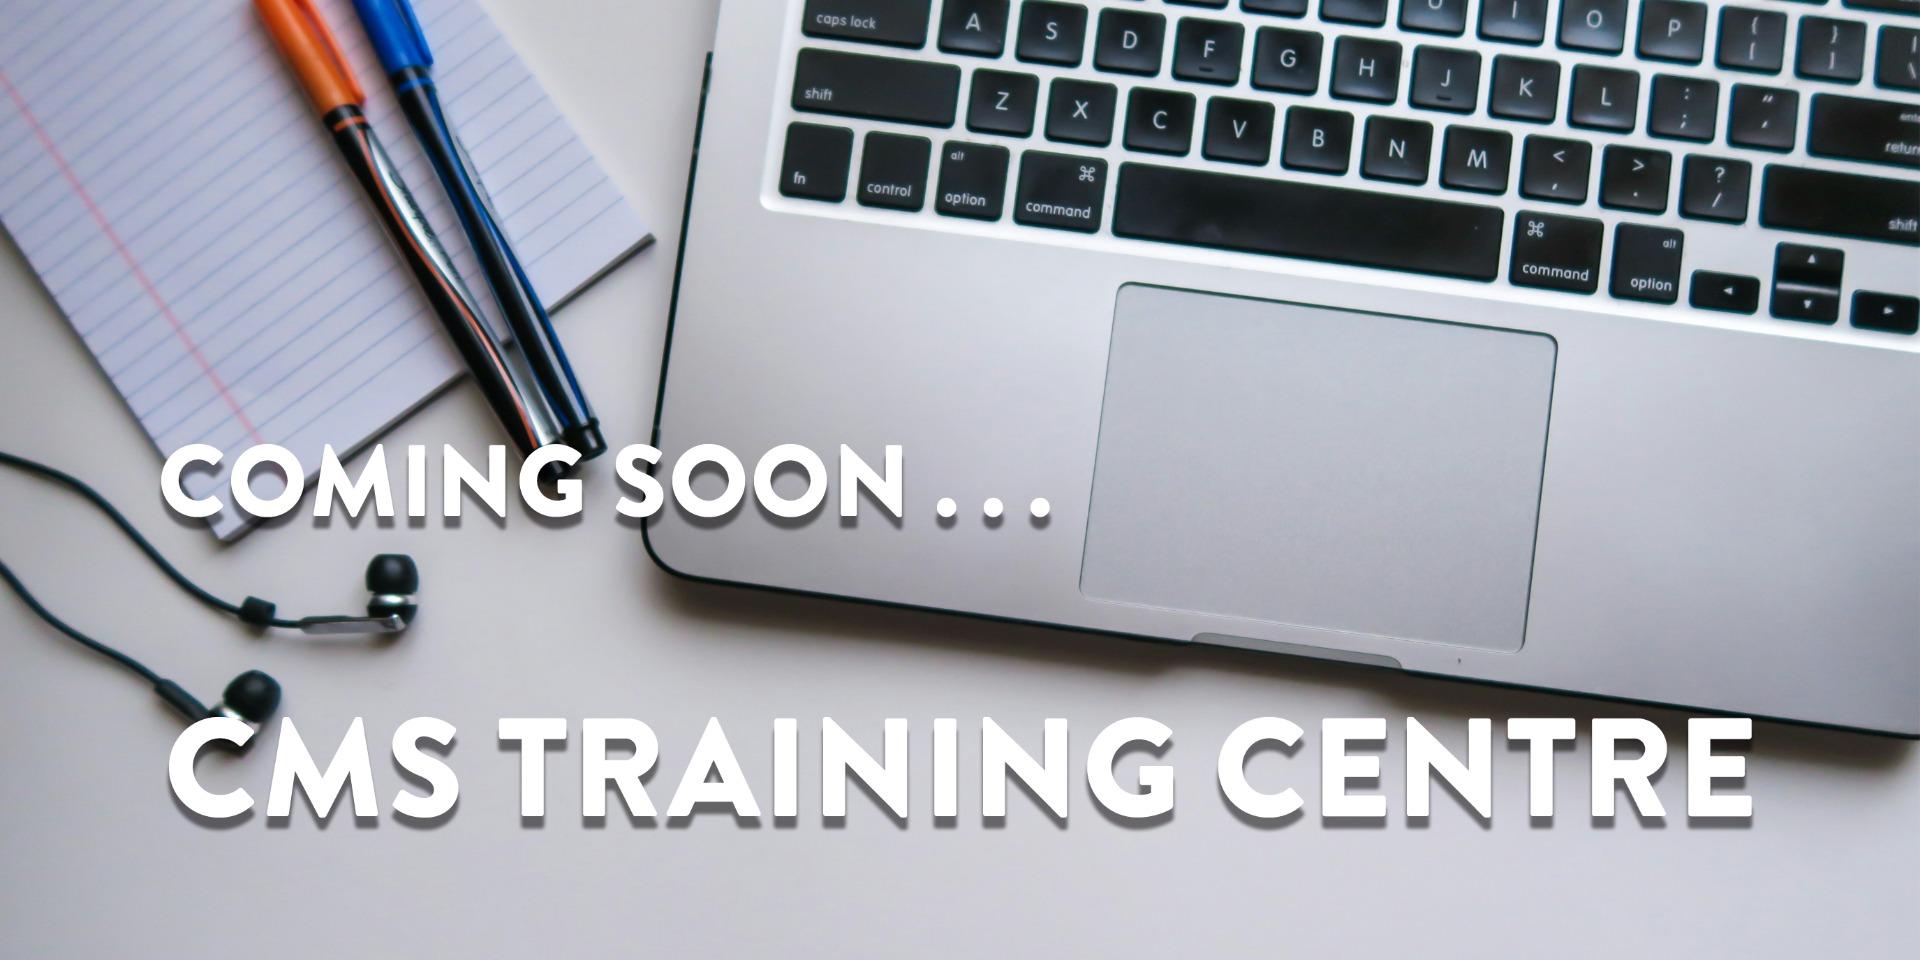 CMS Training Centre – Coming Soon